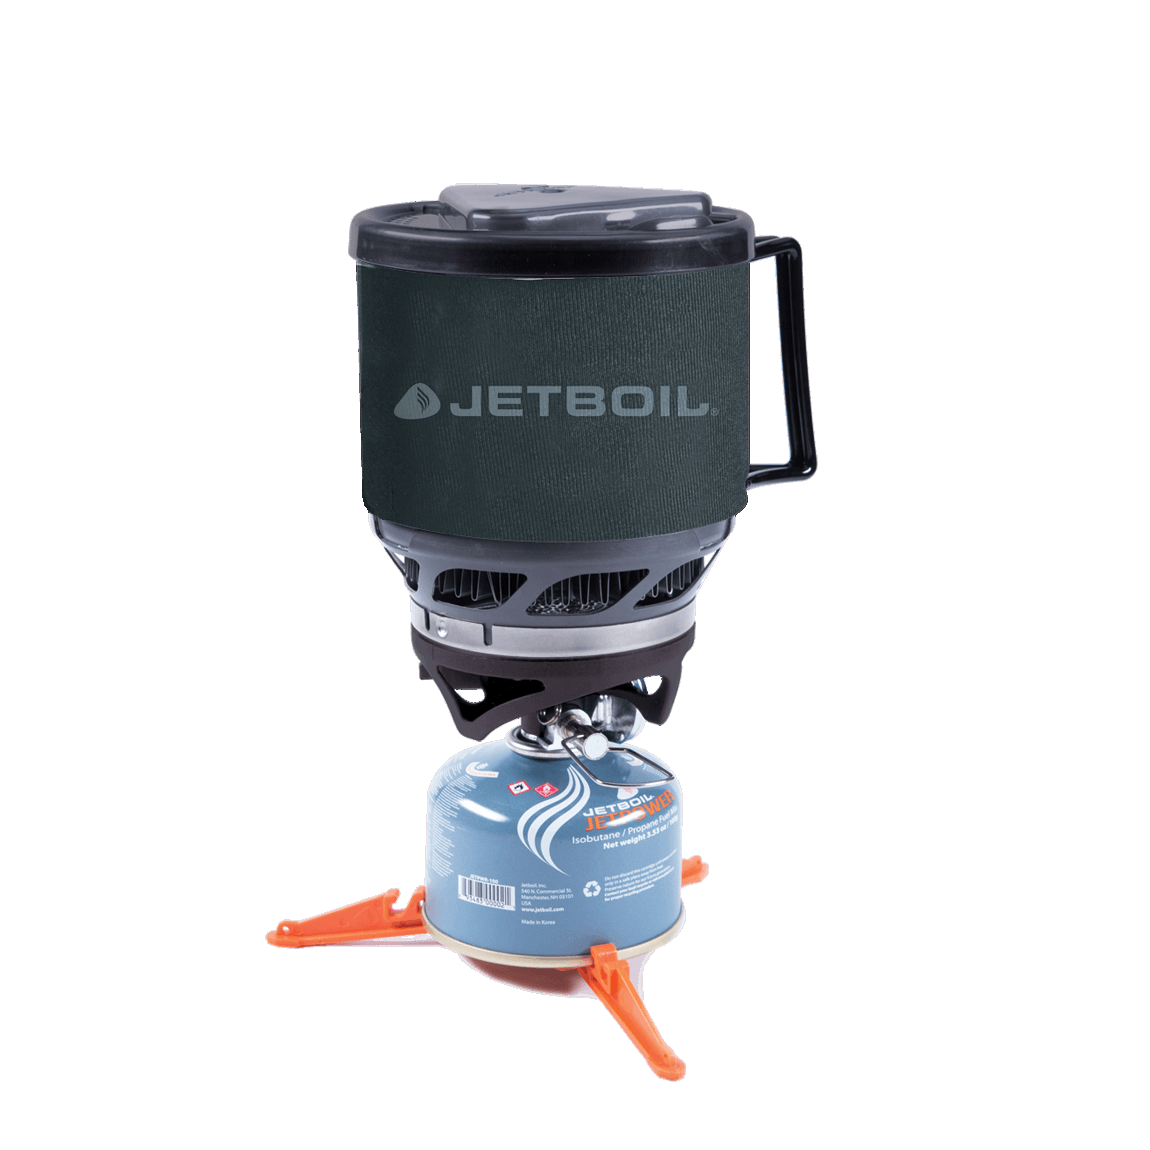 Jetboil Minimo Camping Stove